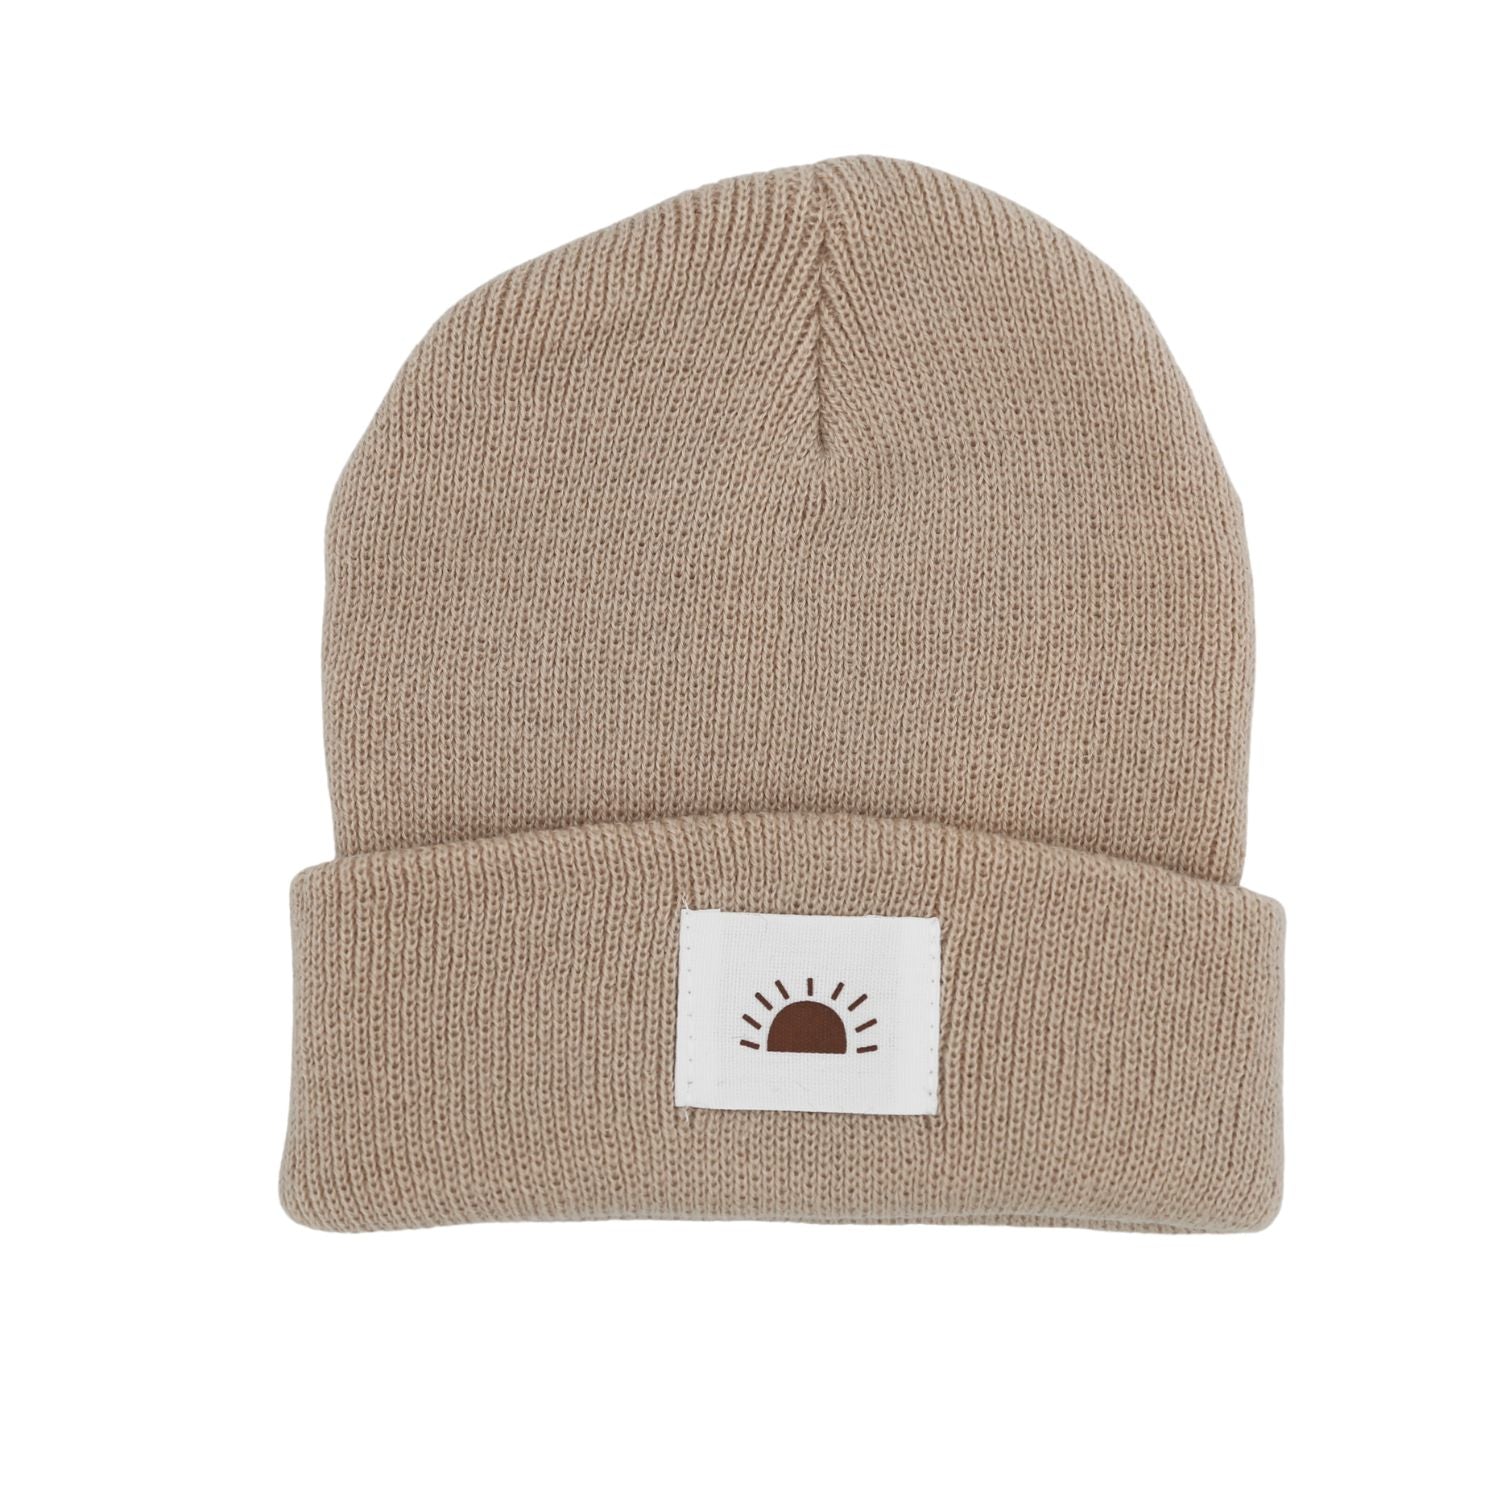 The Baby Cubby Sun Patch Knitted Beanie - Taupe